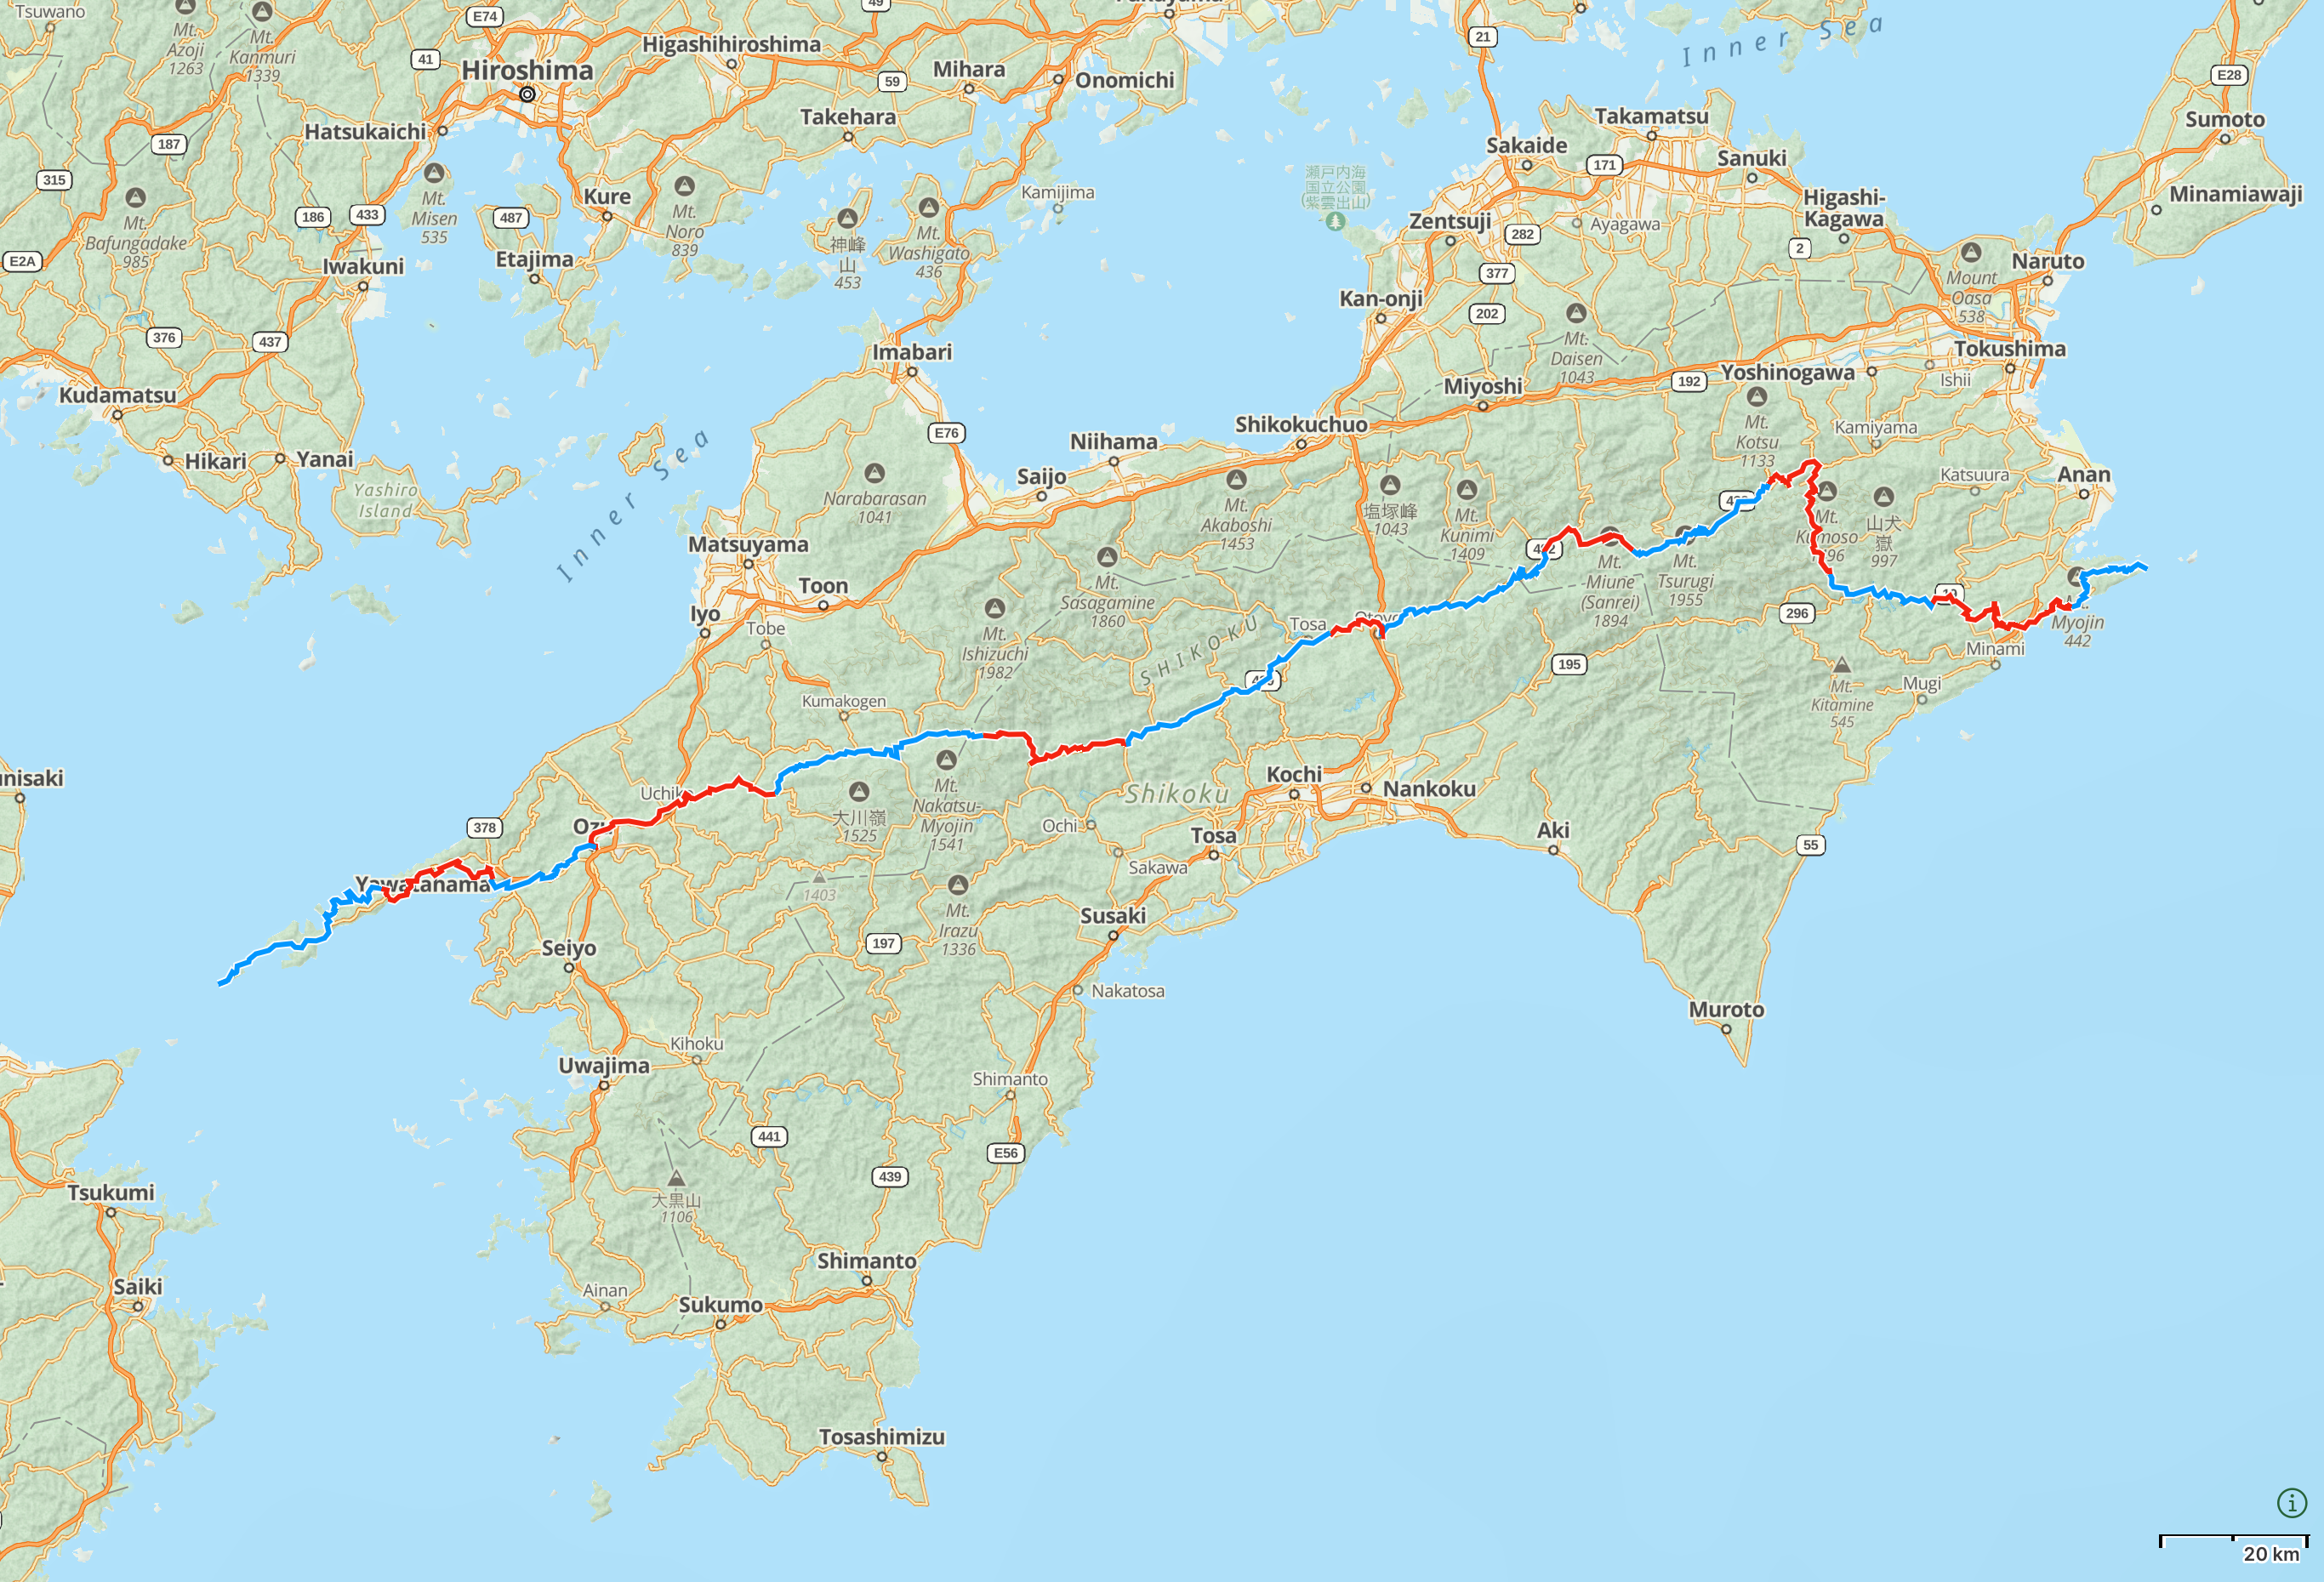 Map of Shikoku with the route of Shikoku Field Diary highlighted.